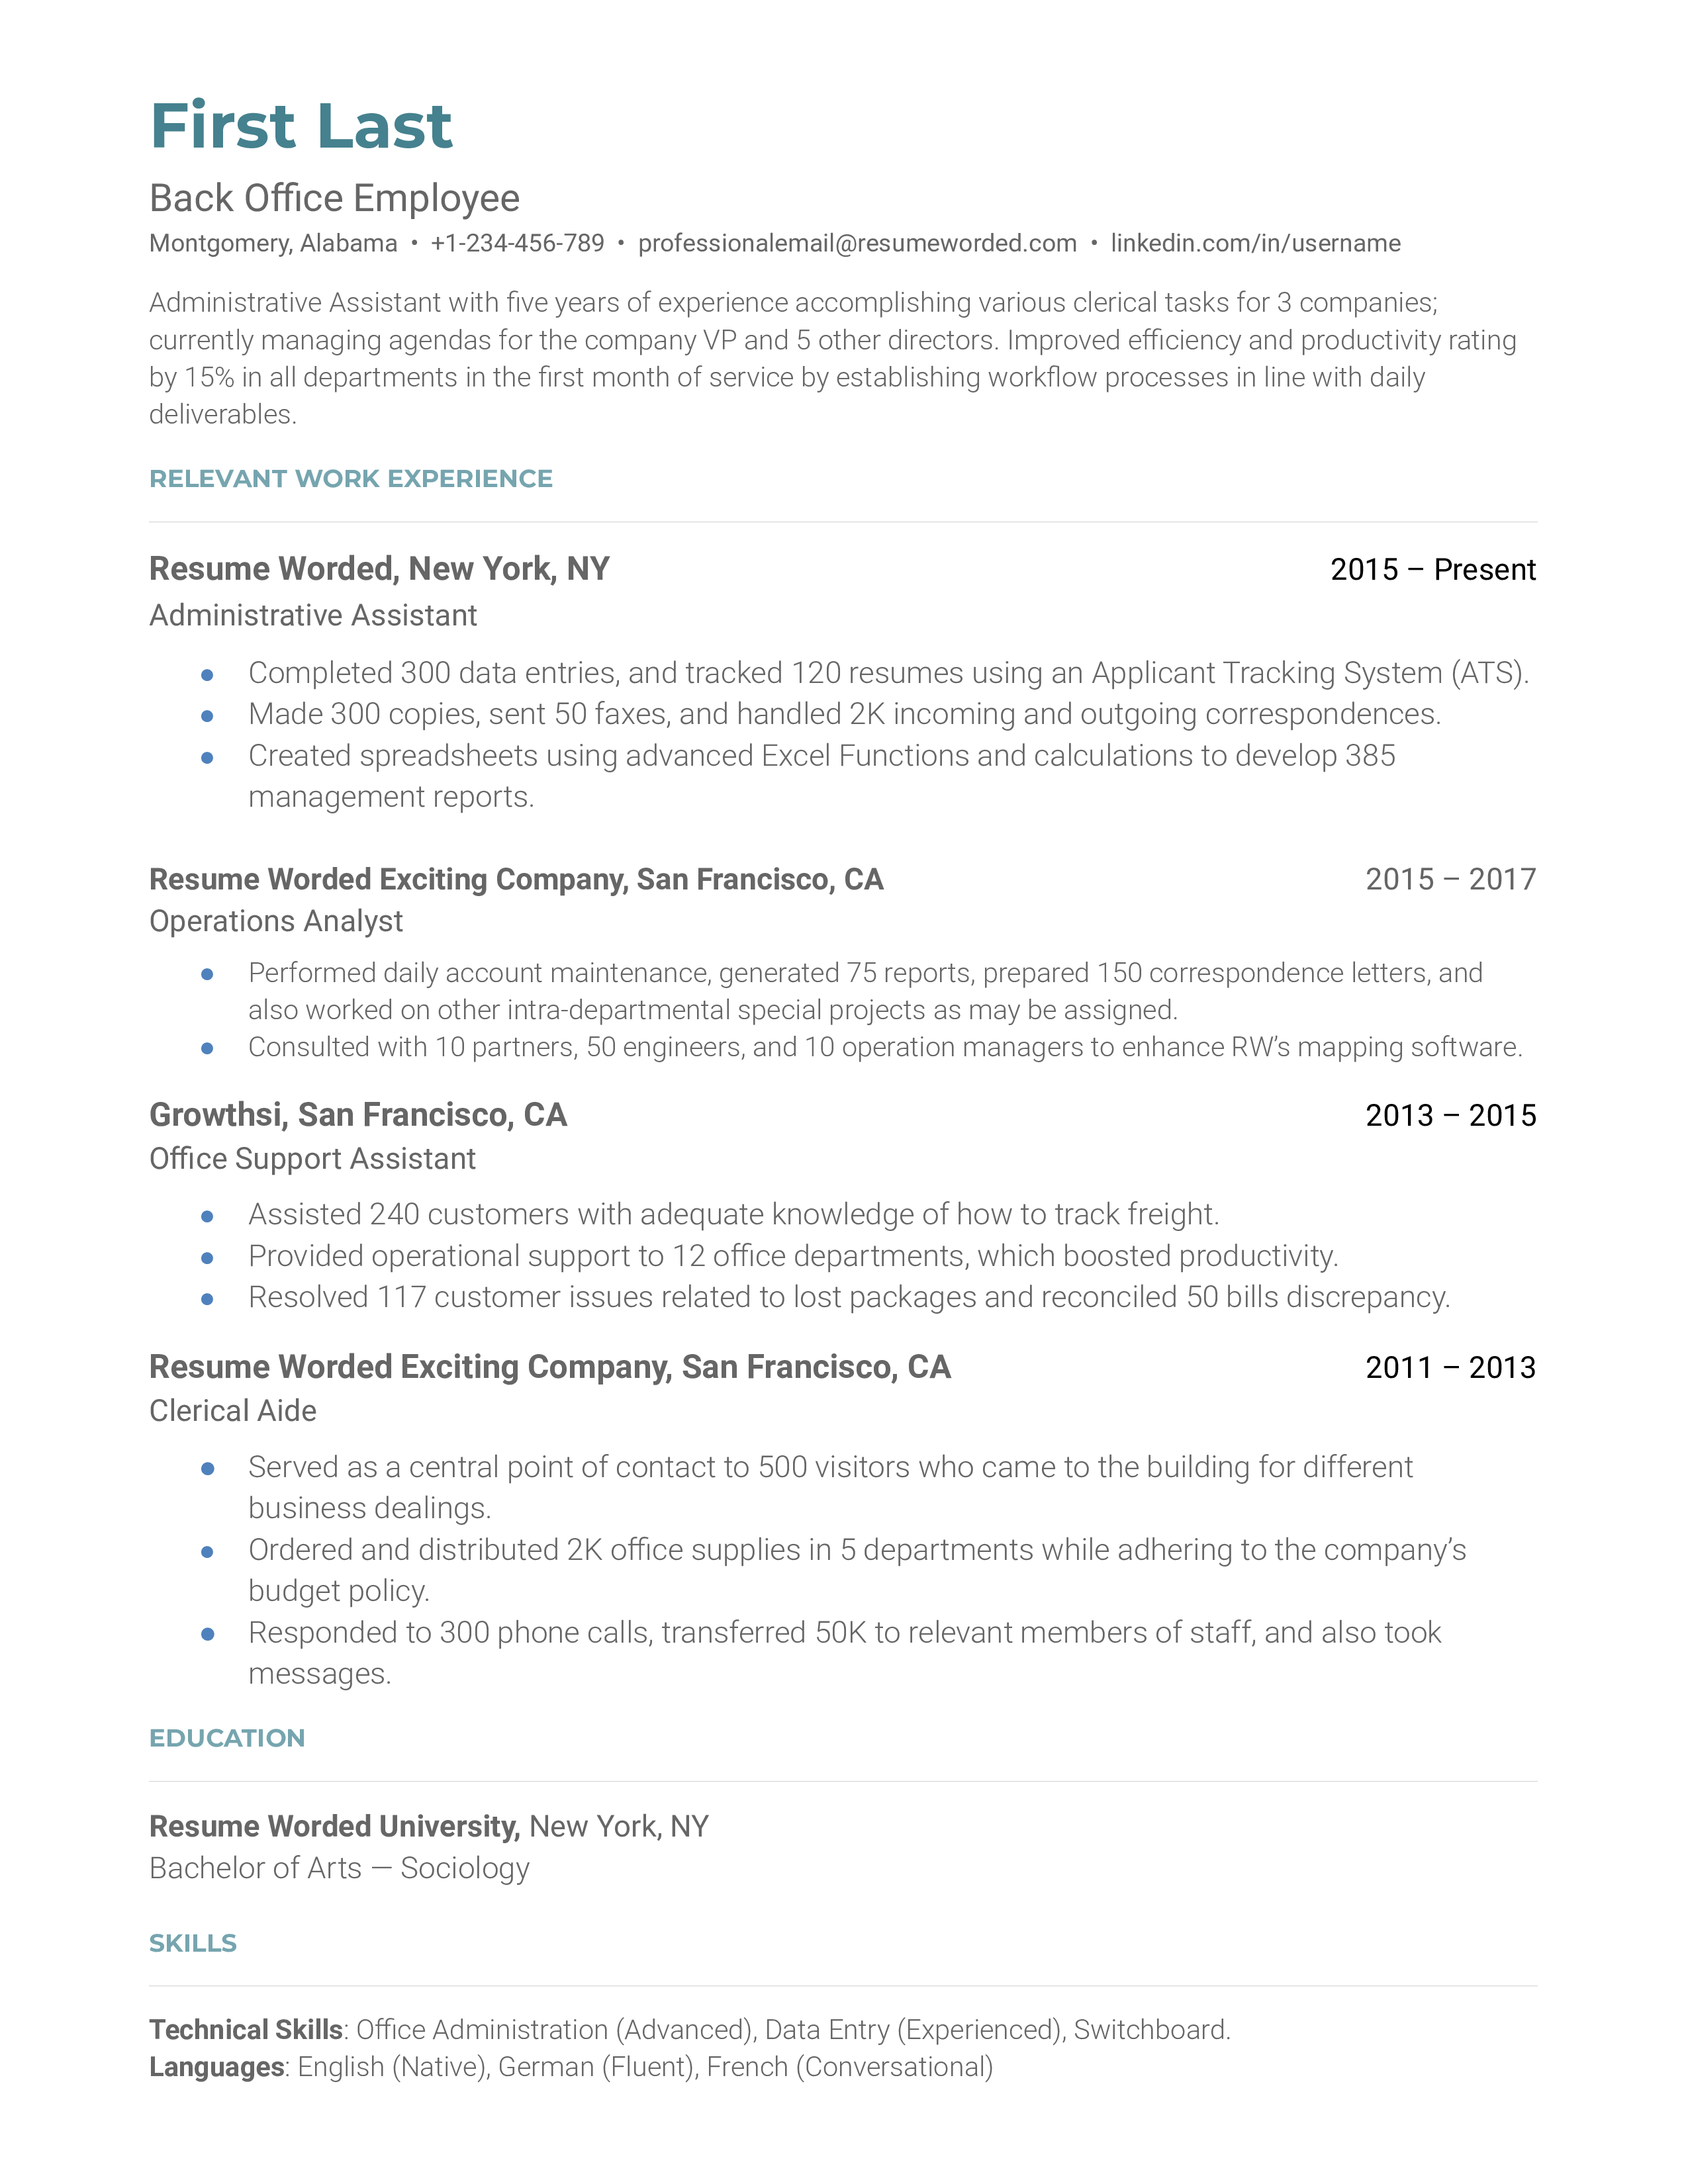 Back Office Employee Resume Template + Example